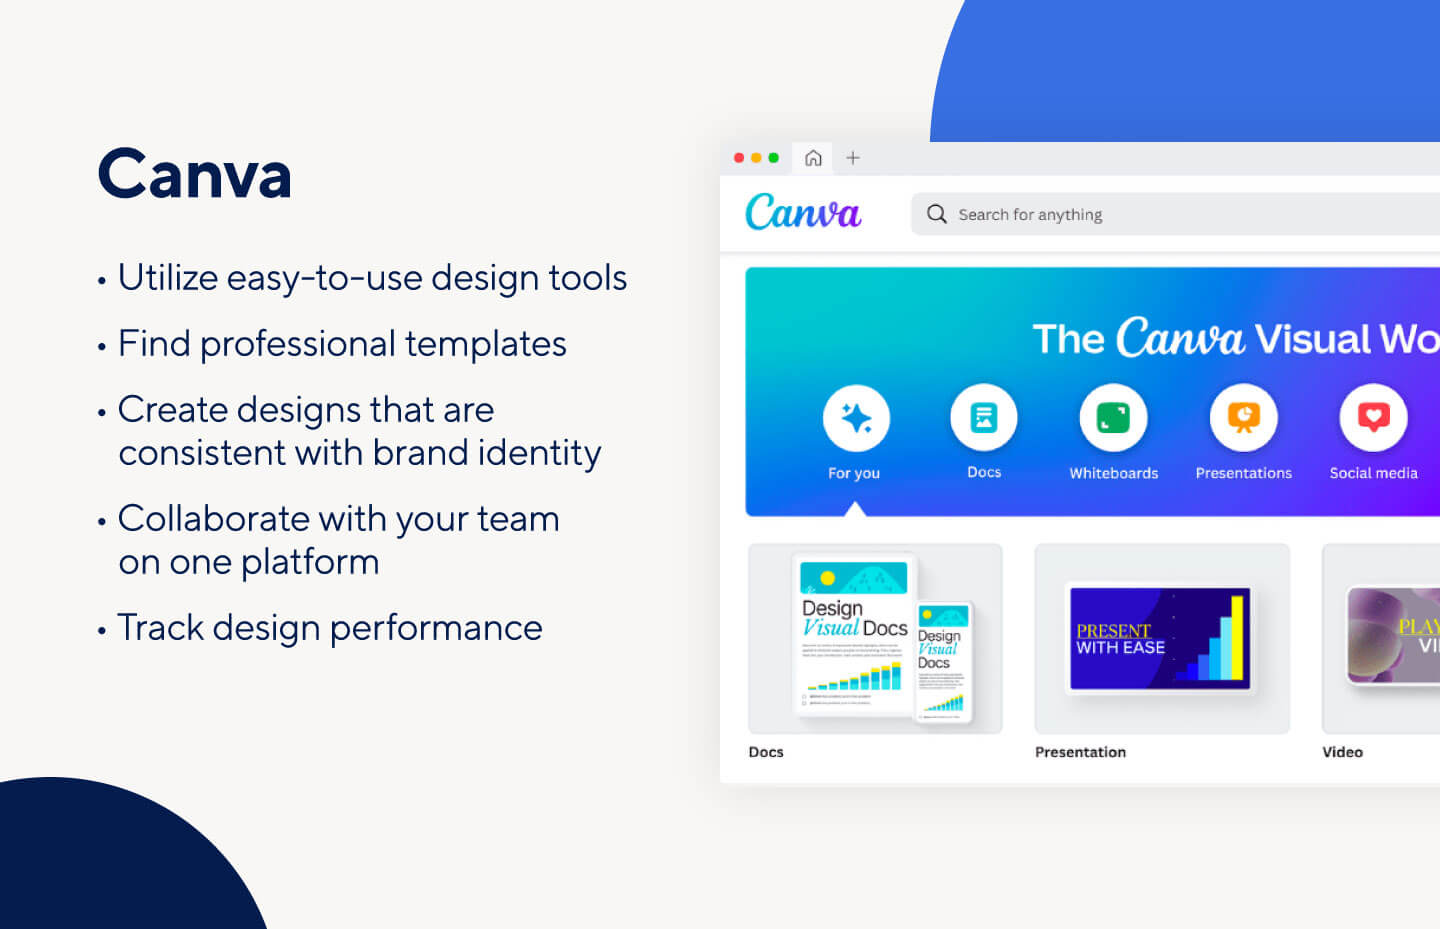 Canva helps user create professional-looking designs quickly and easily.